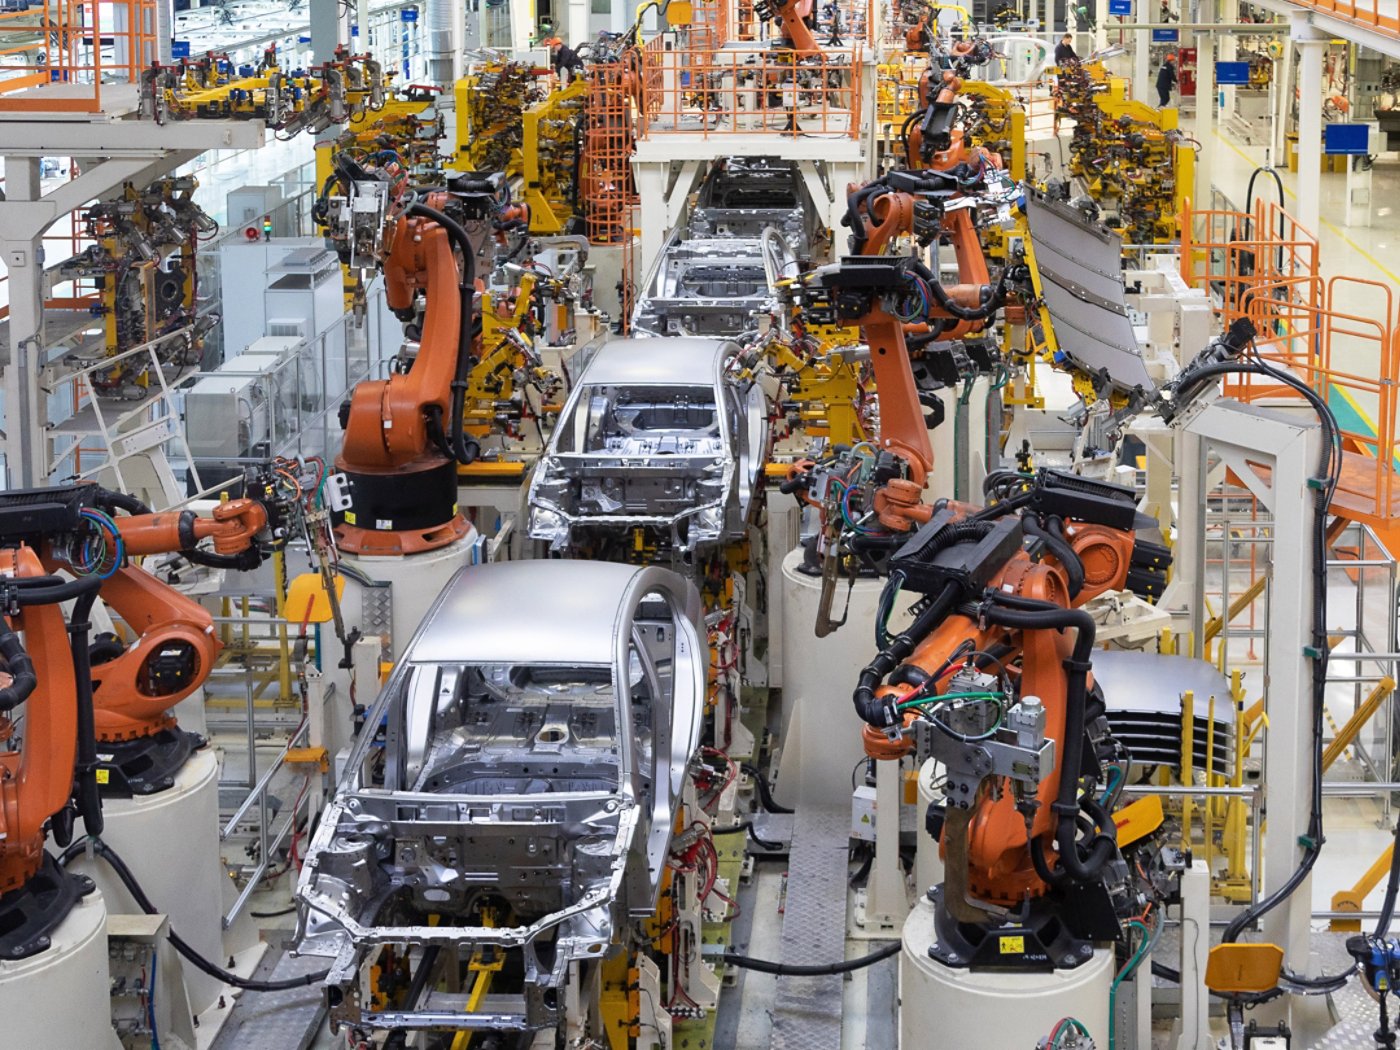 Cars being assembled at a modern automotive plant.